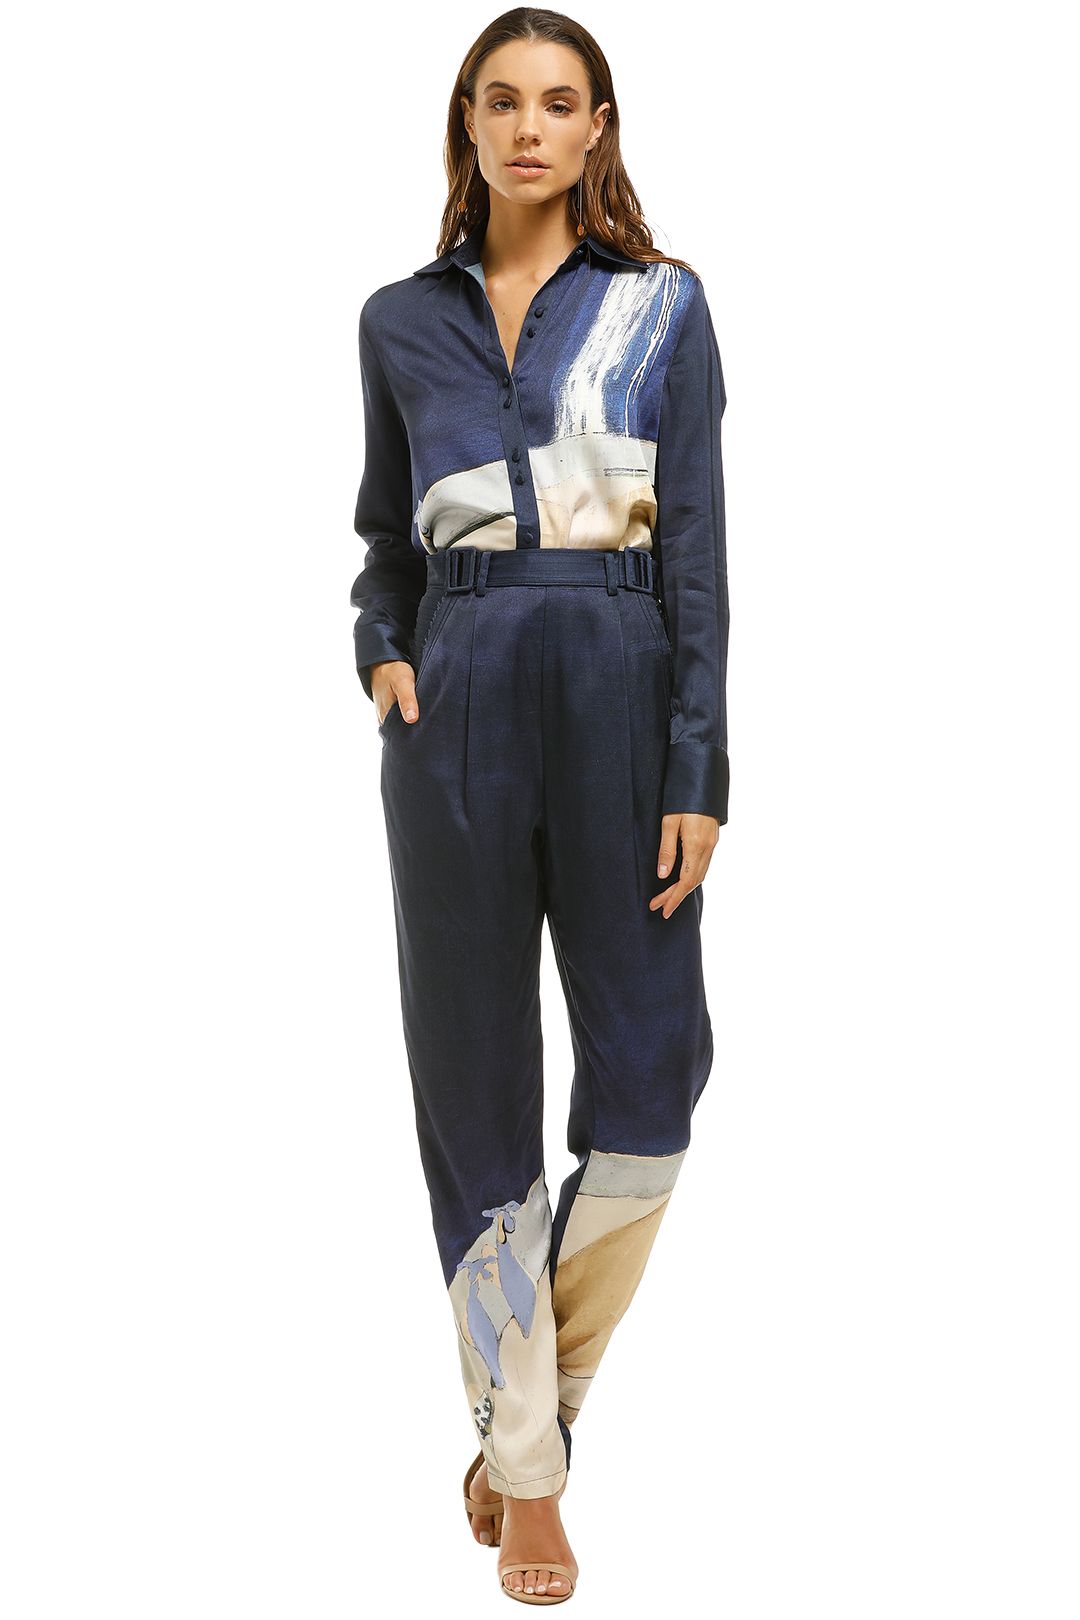 Aje-Chiltern-Trouser-Woman-in-Bath-Navy-Front